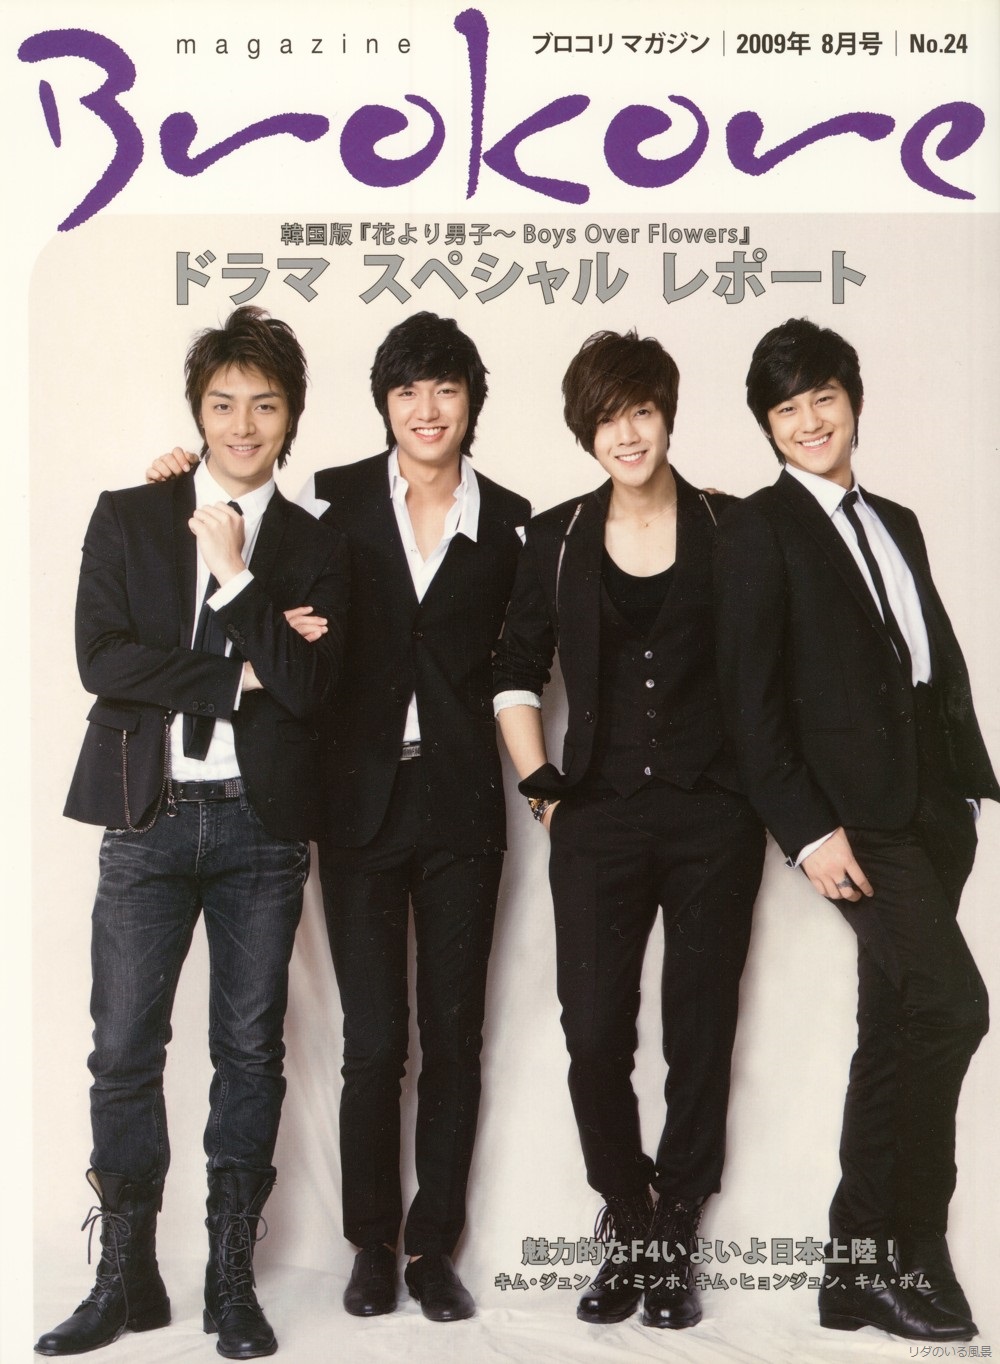 Start from the August issue of Boys Over Flowers - No.24 2009 years Brokore magazine